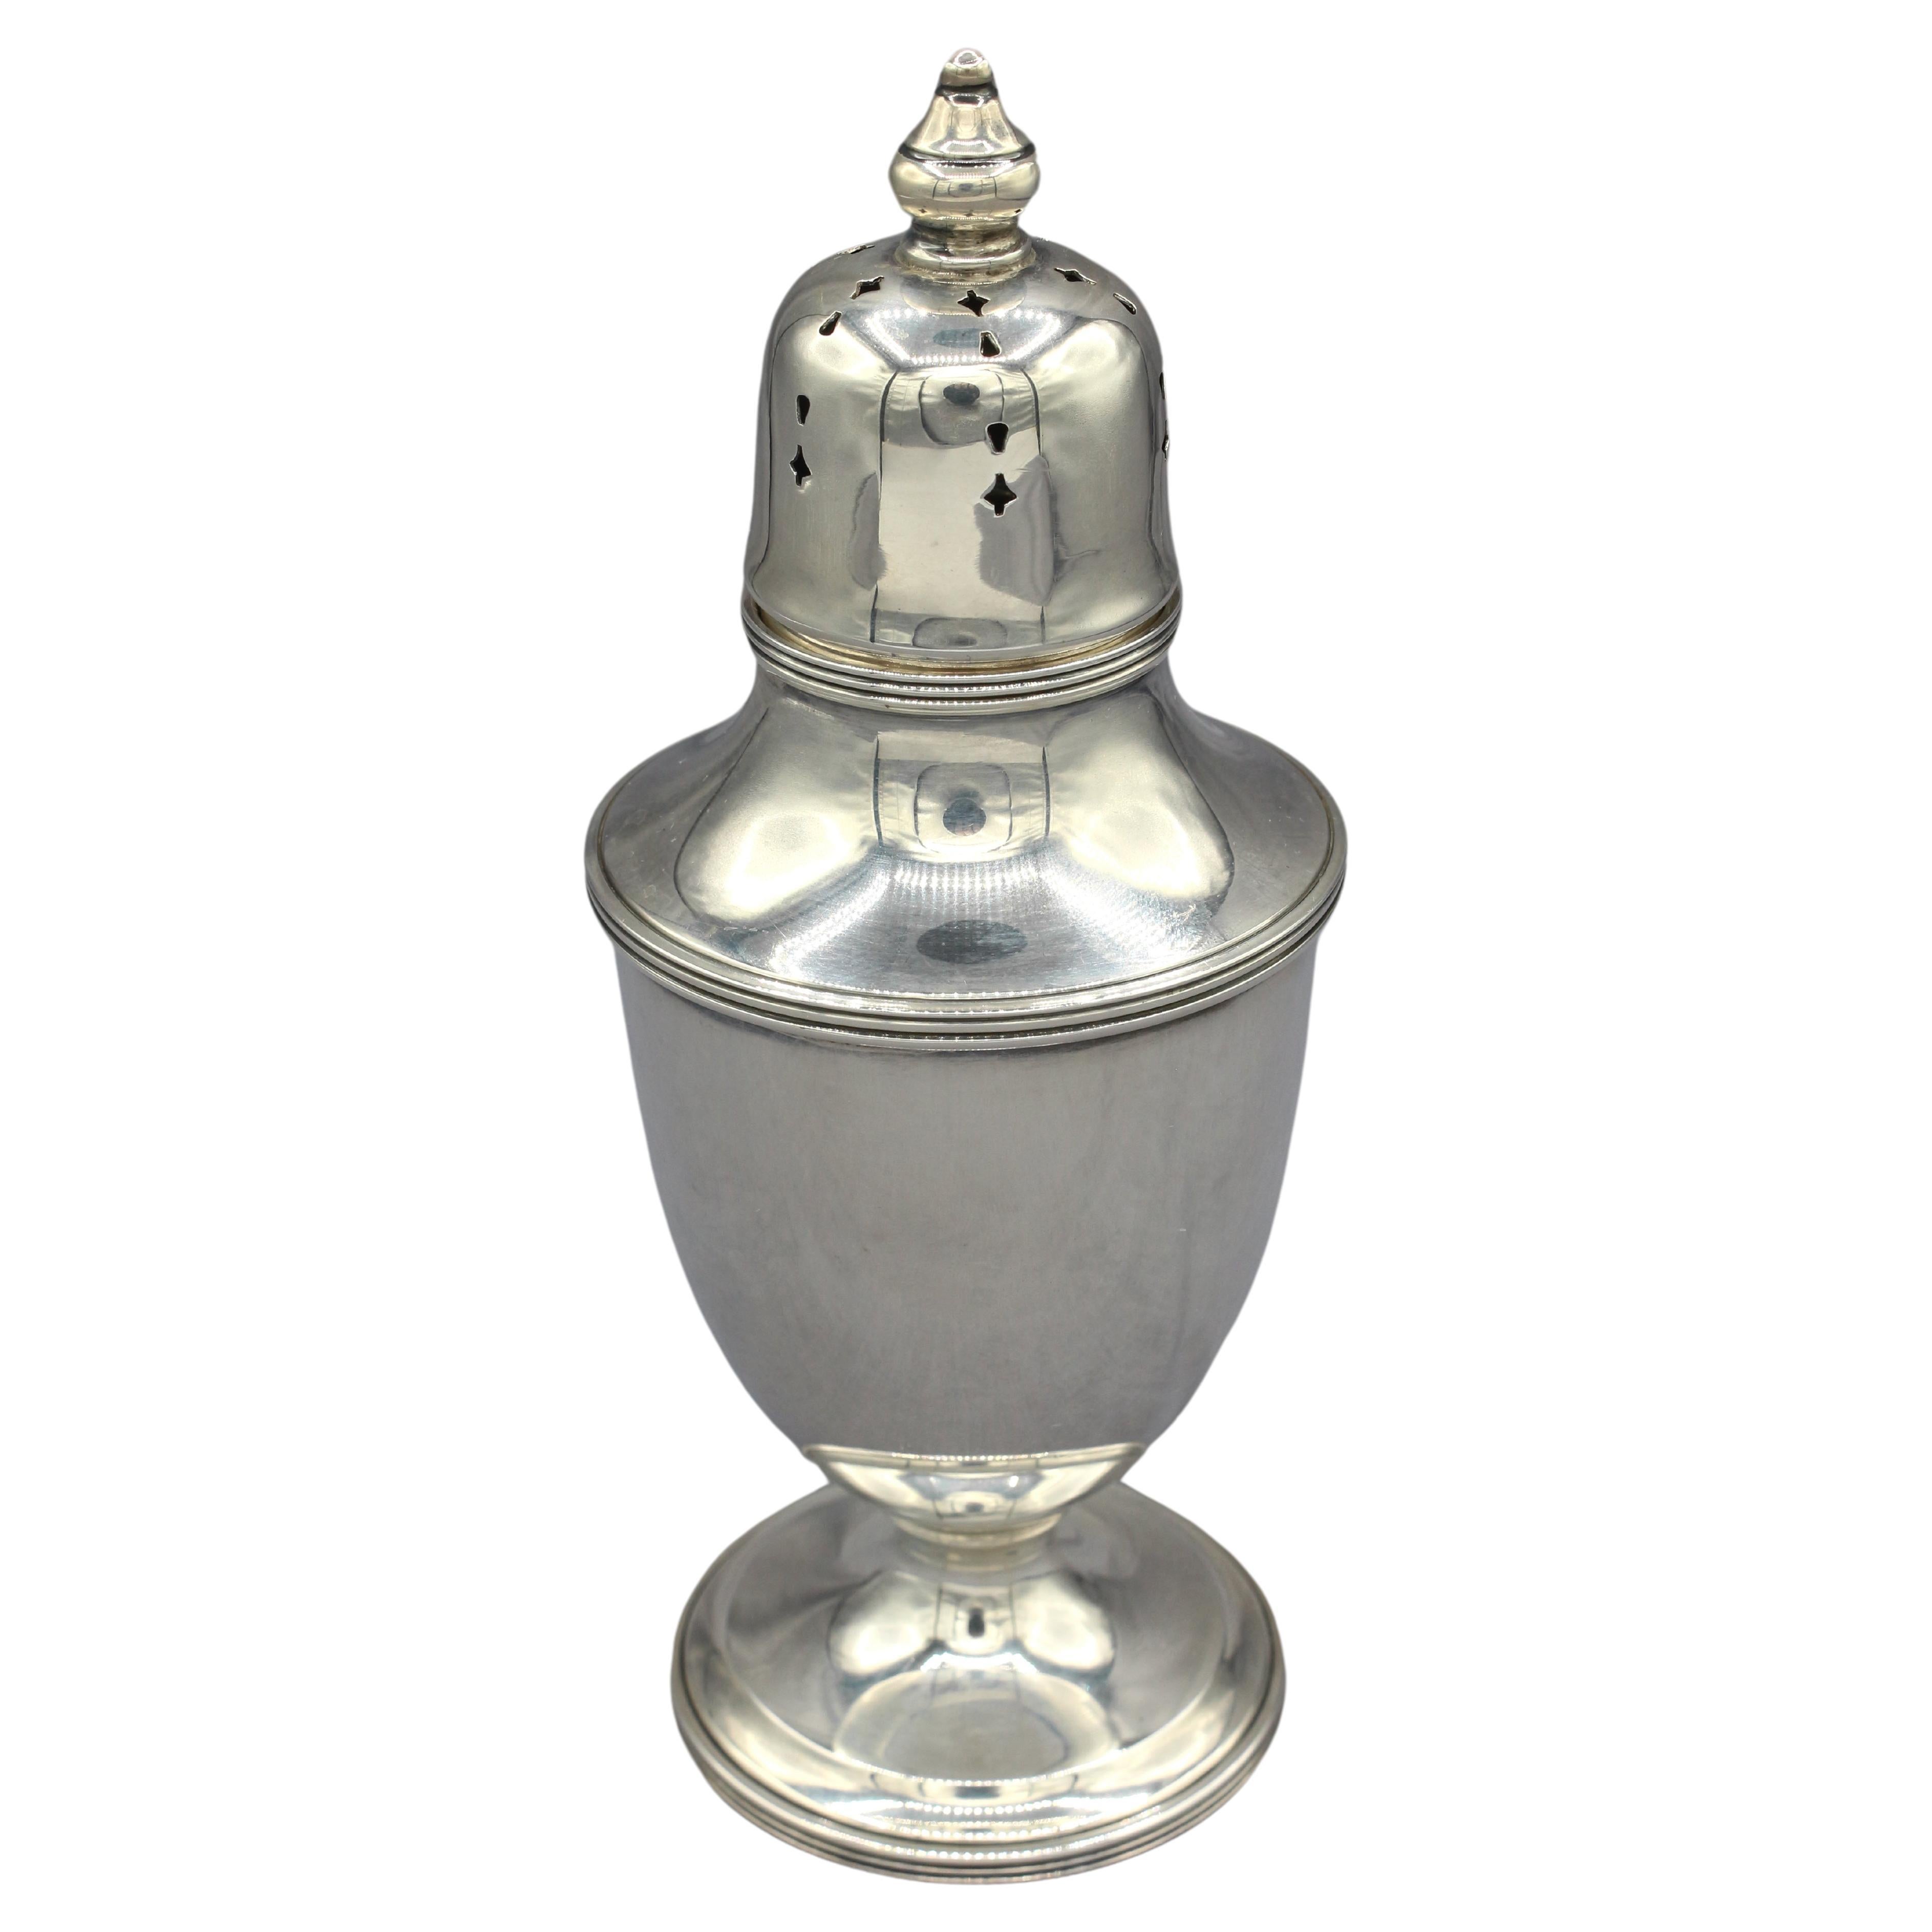 Circa 1940s Sterling Silver Sugar Caster by Mueck & Cary For Sale